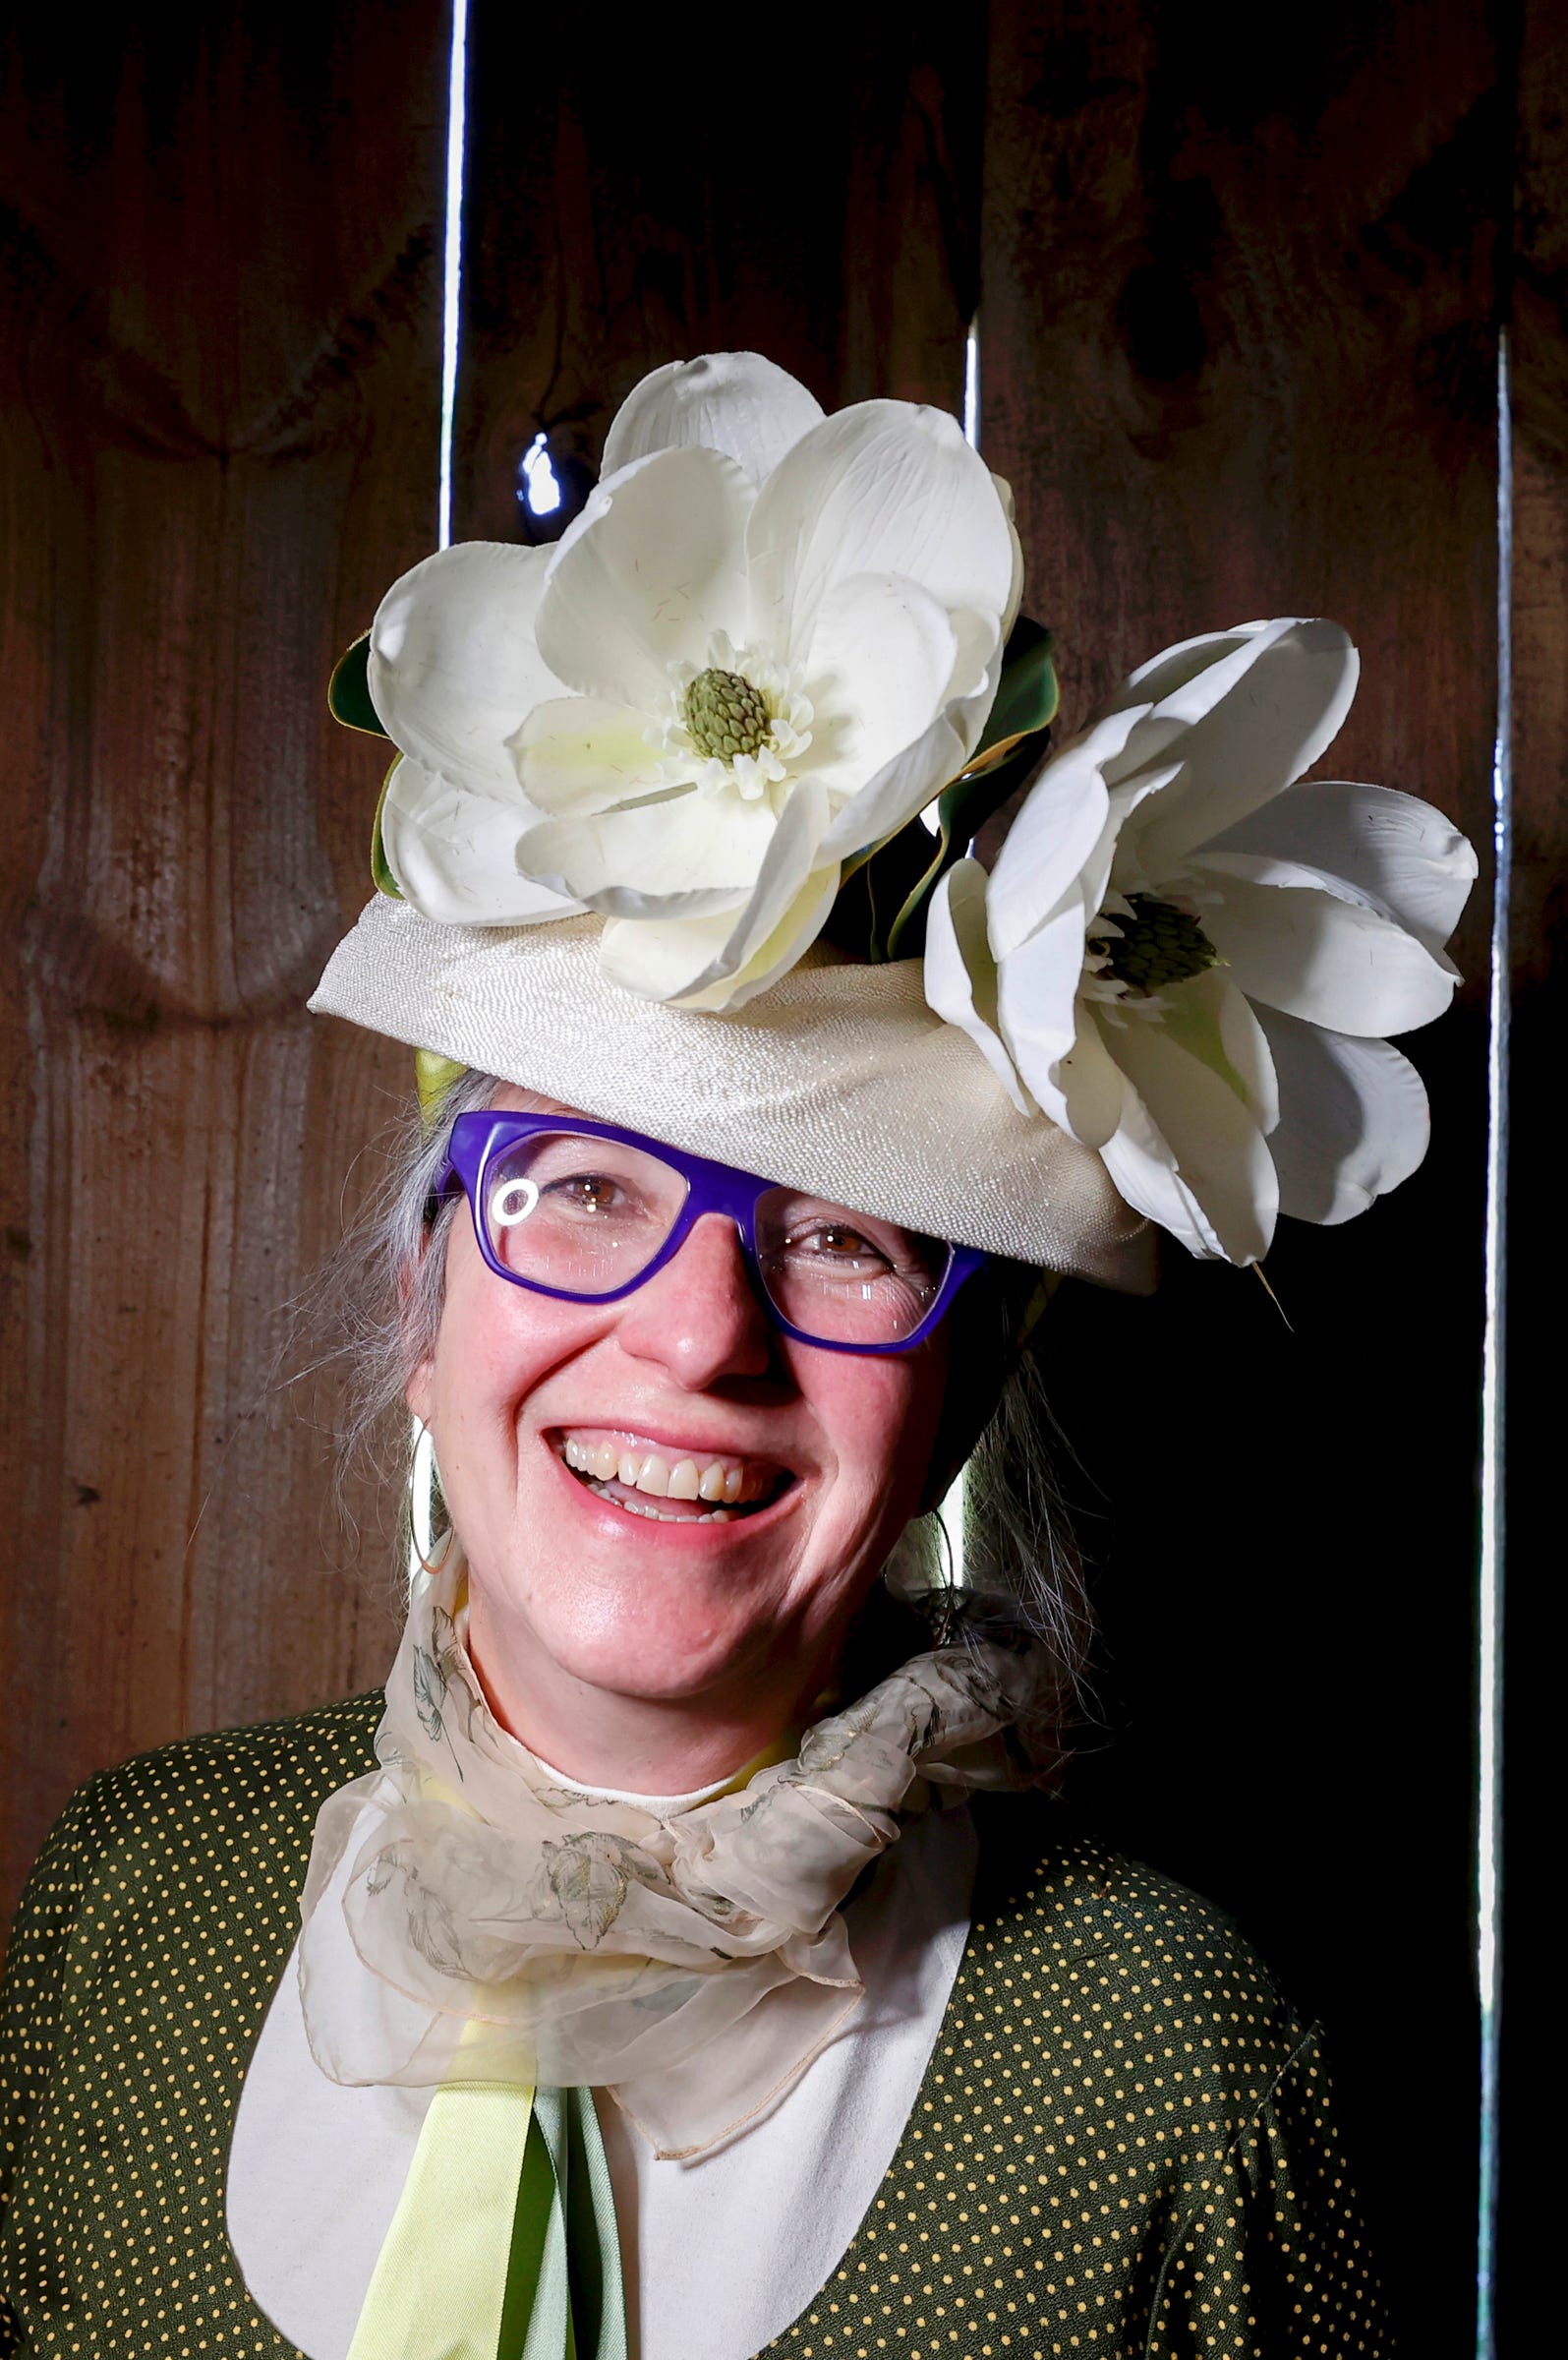 Helen Taylor, 61 of Okemos is all smiles showing off her  Kentucky Derby to the fifth annual Hats & Horses Kentucky Derby Party at Iron Fish Distillery in Thompsonville, Michigan on Saturday, May 7, 2022.The distillery on the west side of the state has their own derby horse race that each year raises money for charity.This year a crowd of over 300 cheered as four retired race horses sprinted down the dirt road in front of the distillery.